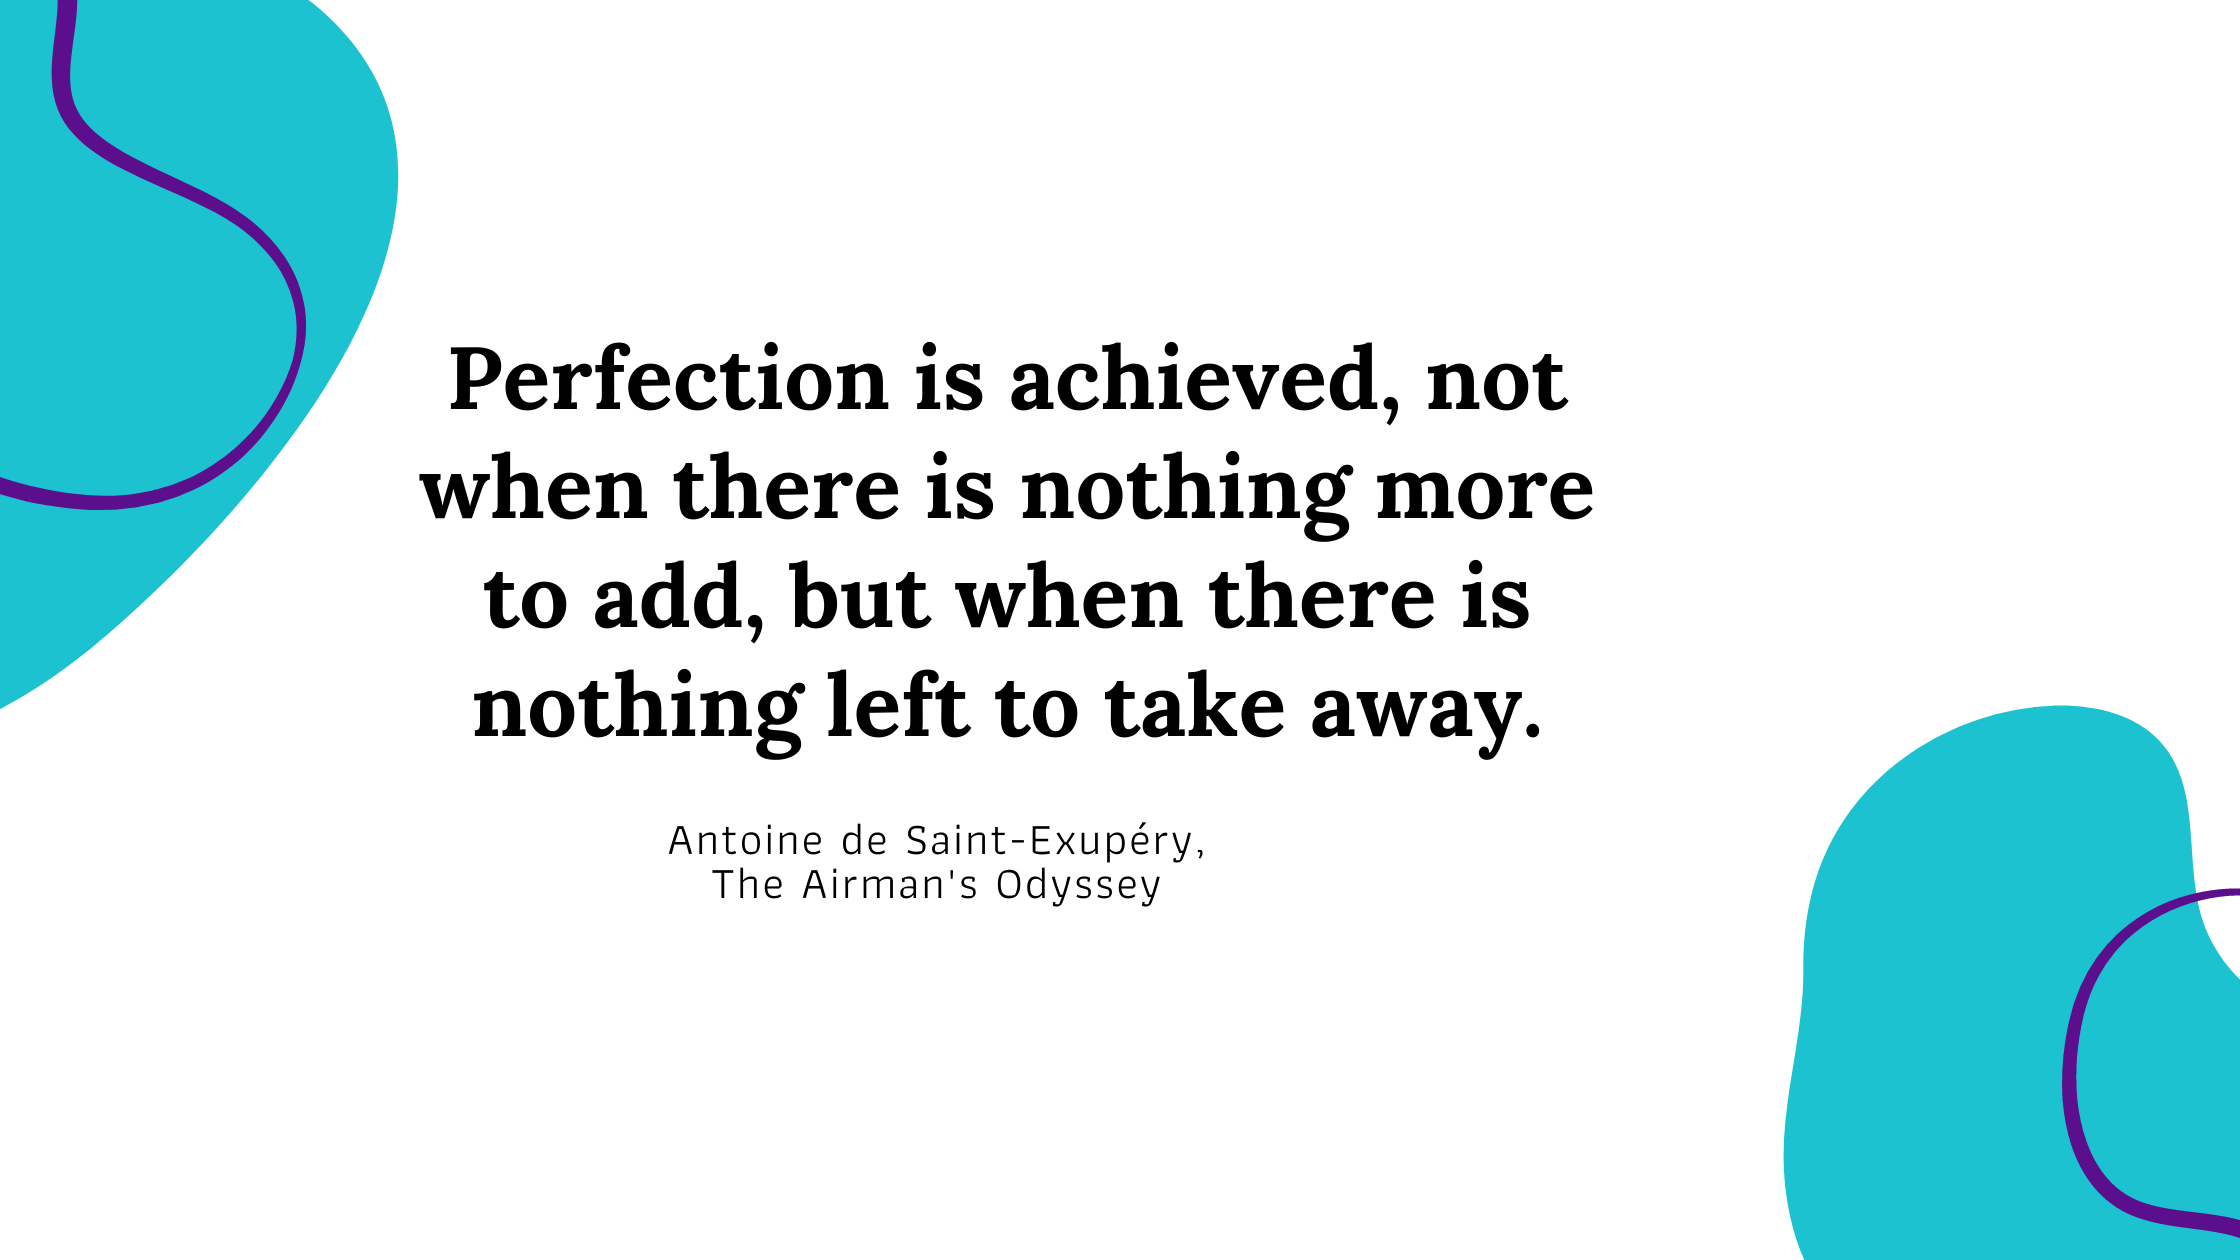 Quote from Antoine de Saint Exupery, Perfection is achieved, not when there is nothing more to add, but when there is nothing left to take away. 